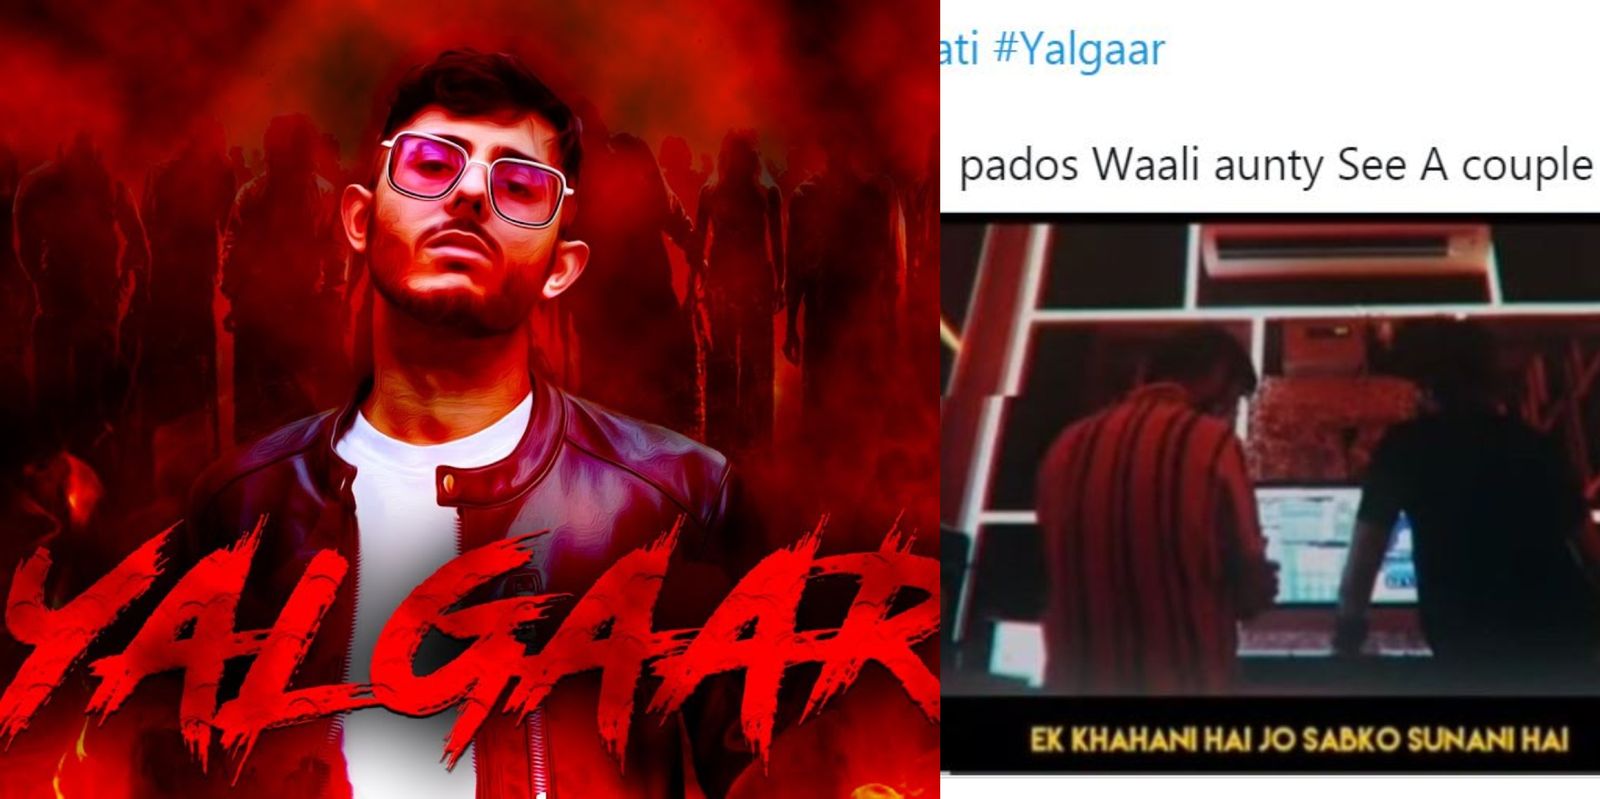 Carryminati Releases New Rap Yalgaar On Youtube Vs. TikTok Battle And Twitter Is Now Flooded With Memes